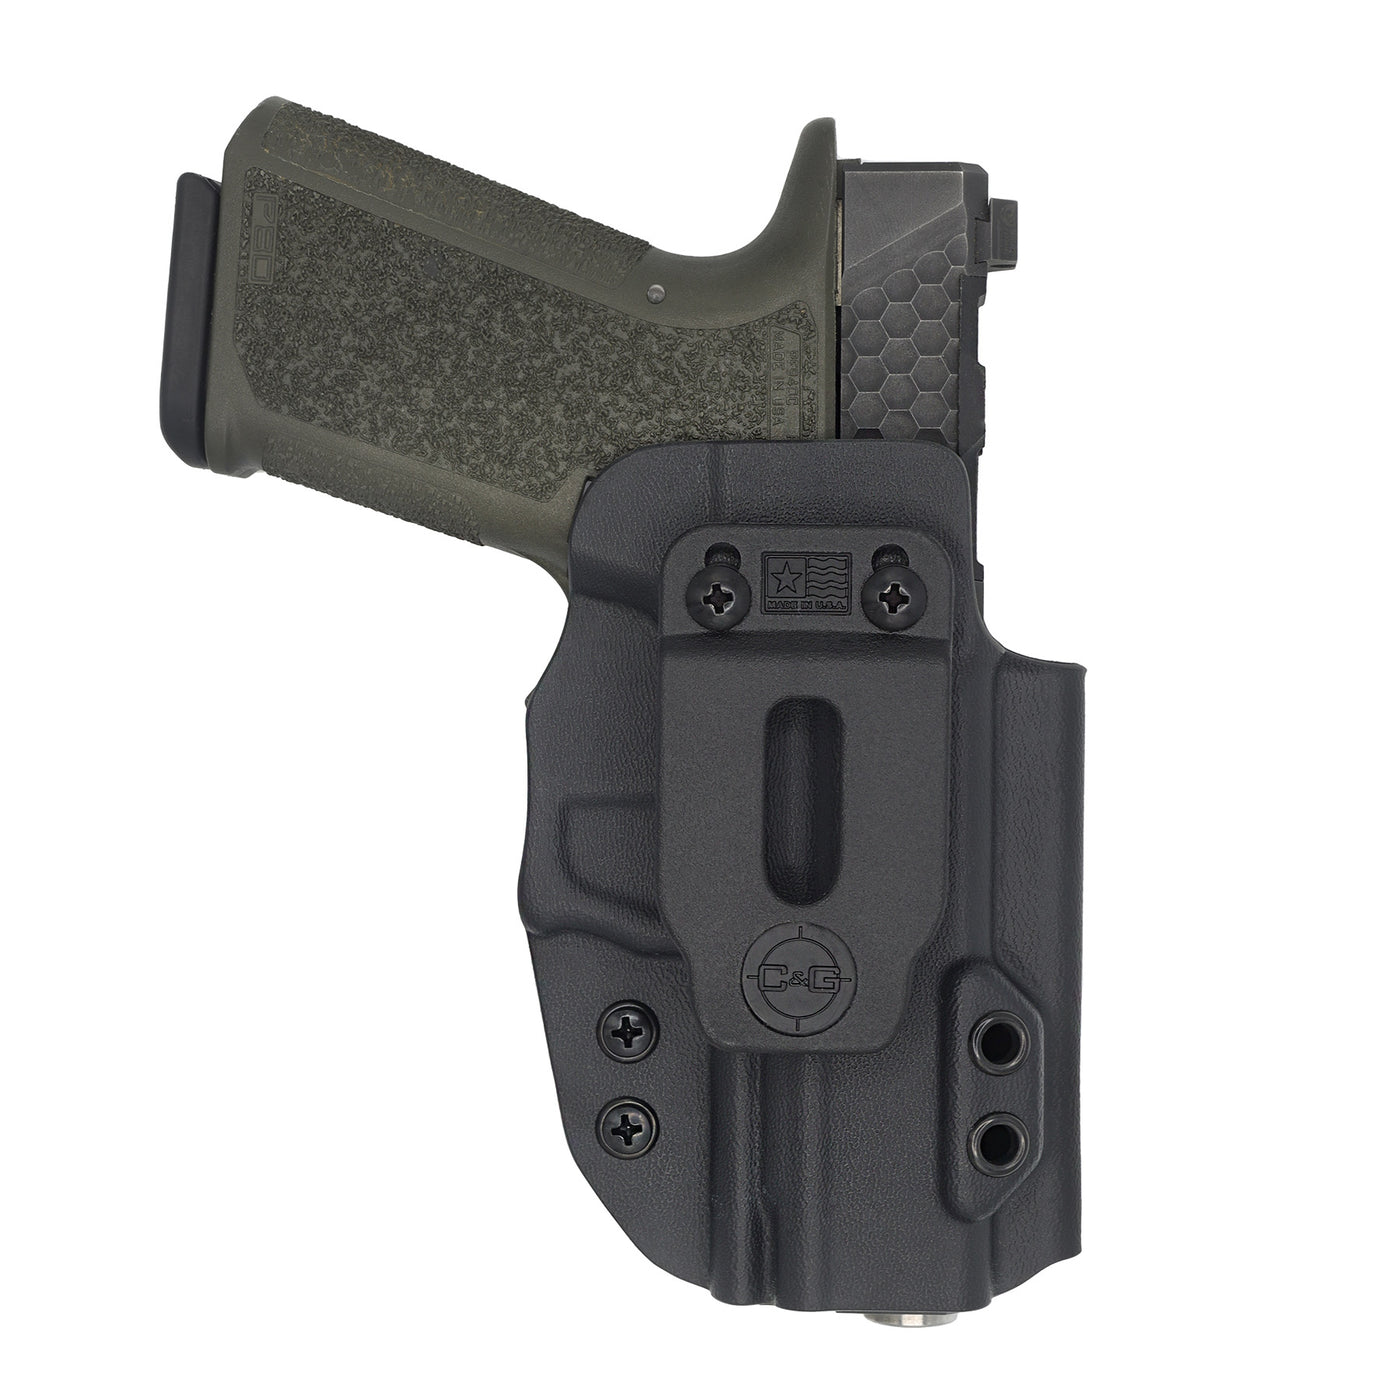 This is the quickship C&G Holsters inside the waistband holster for the Poly80 PF940c in holstered position